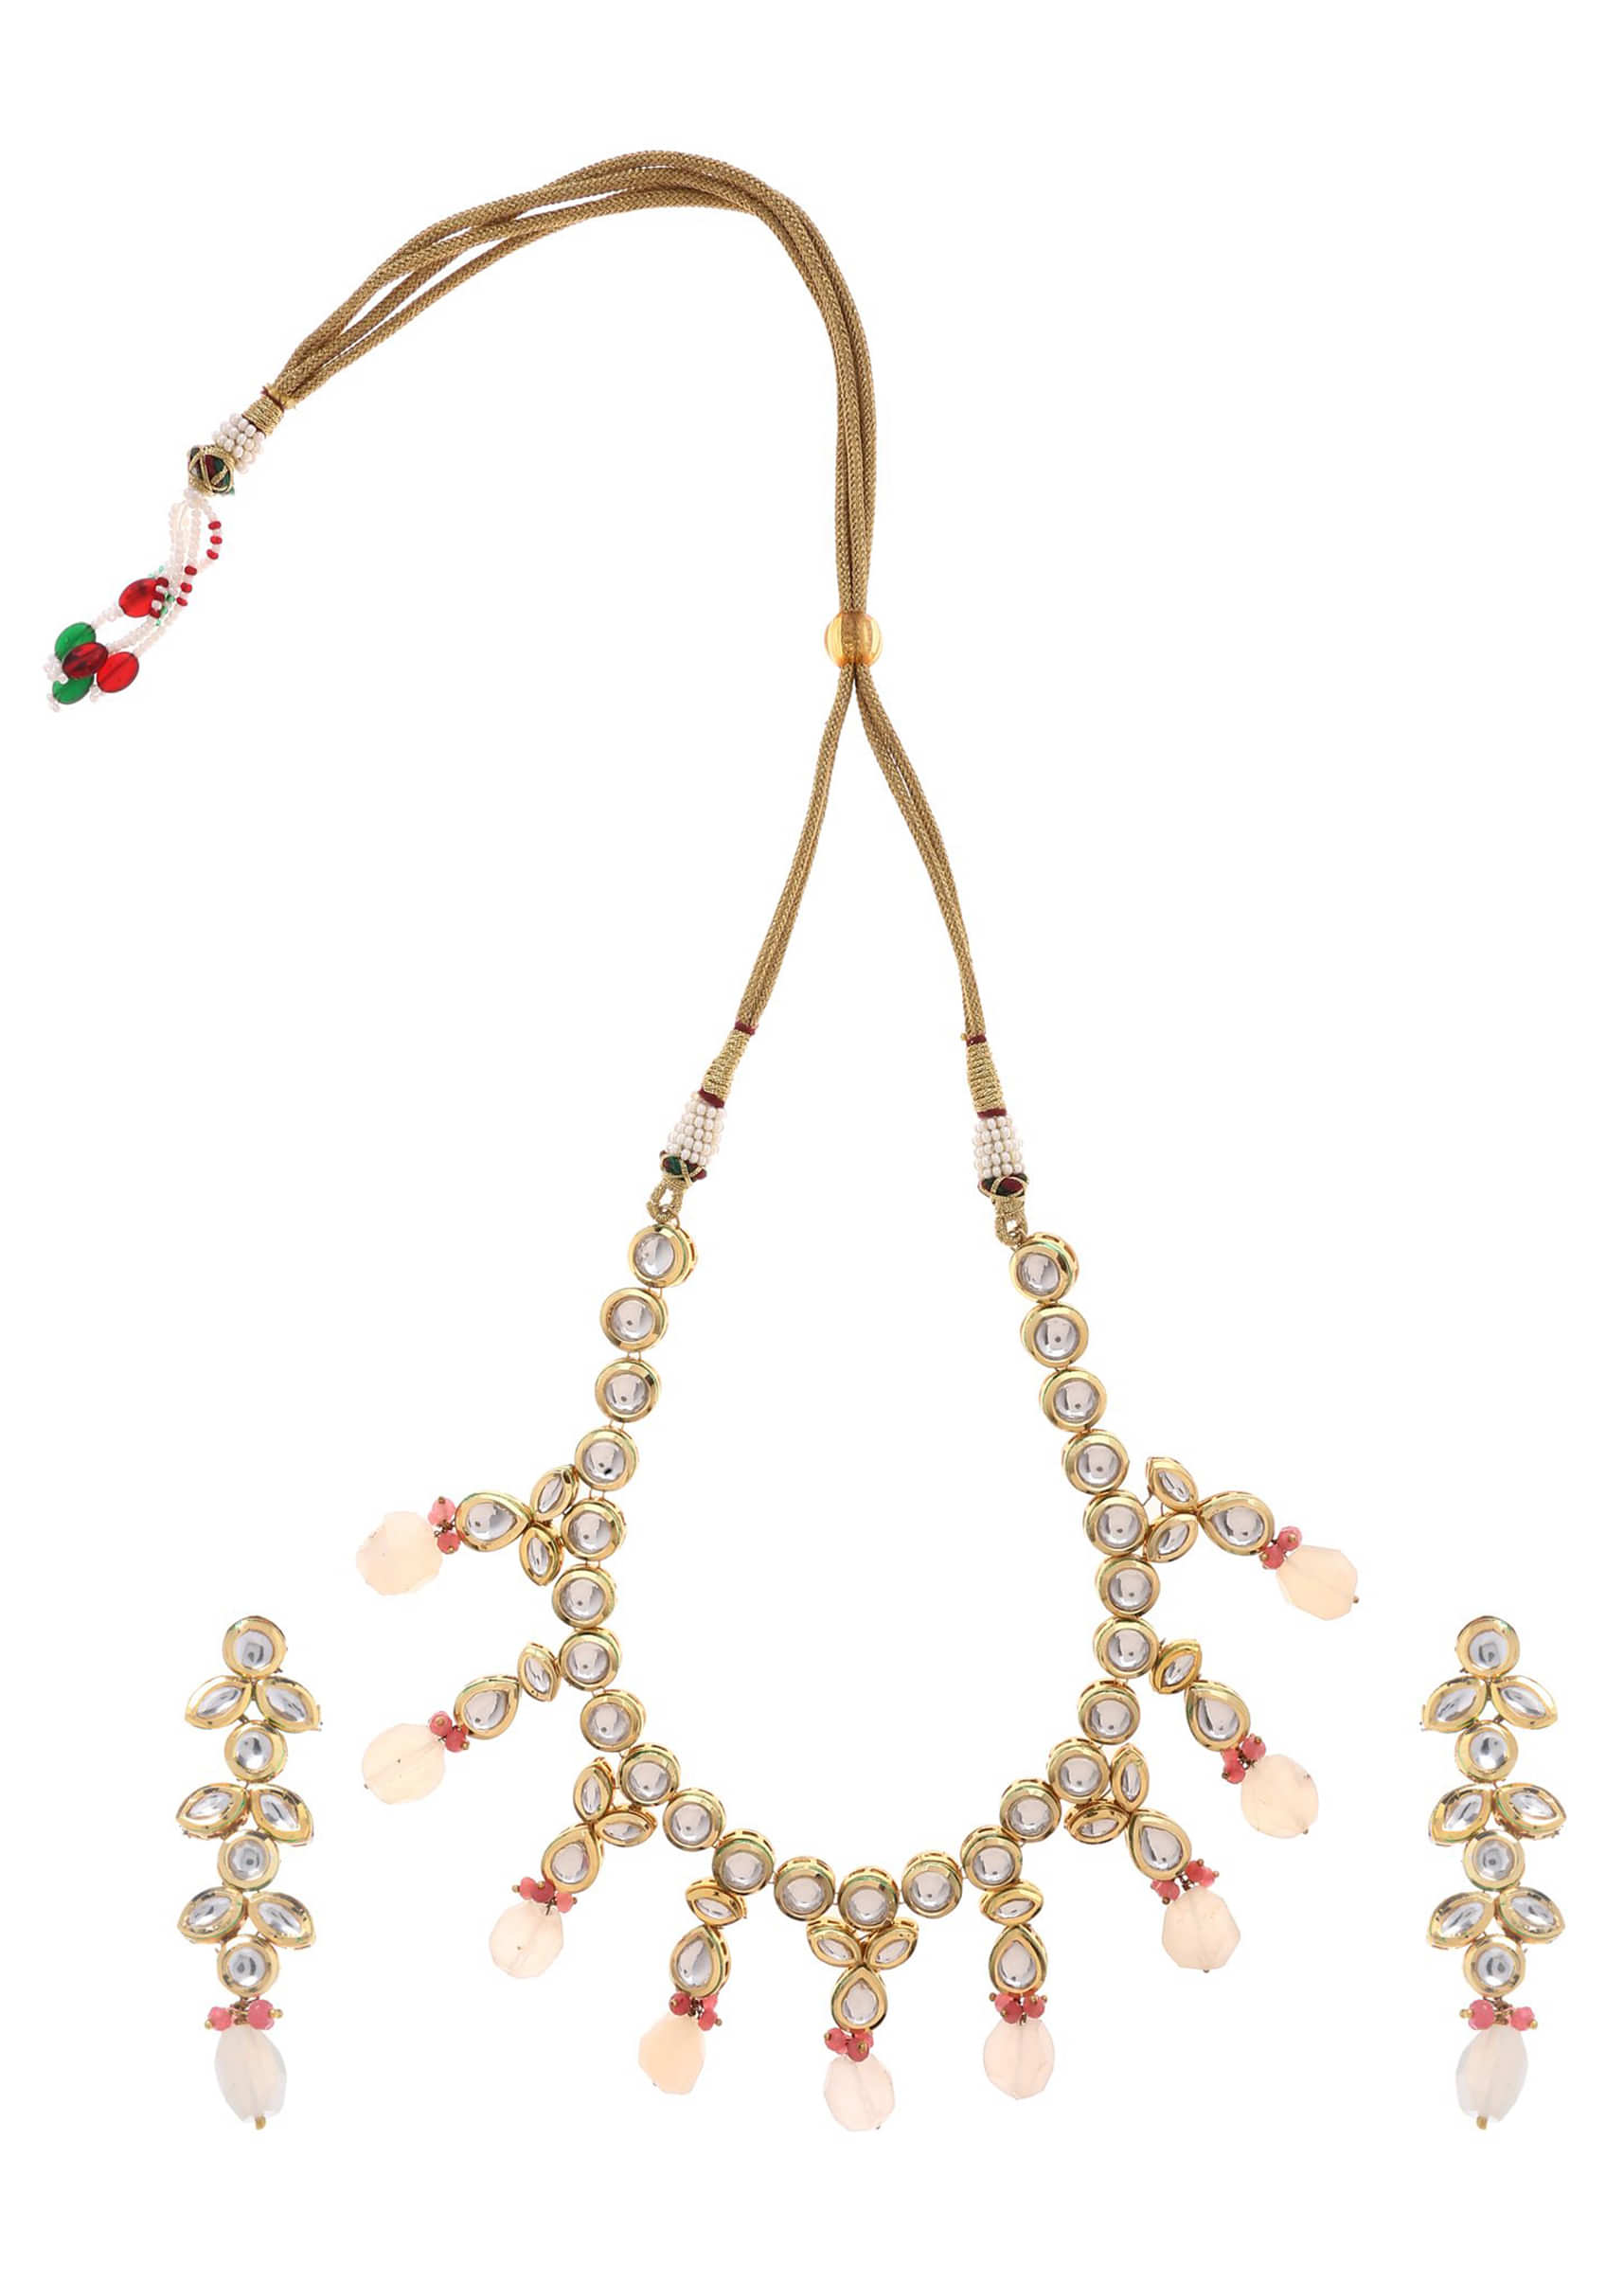 Gold Plated Necklace And Earrings Set Handcrafted With Kundan Work